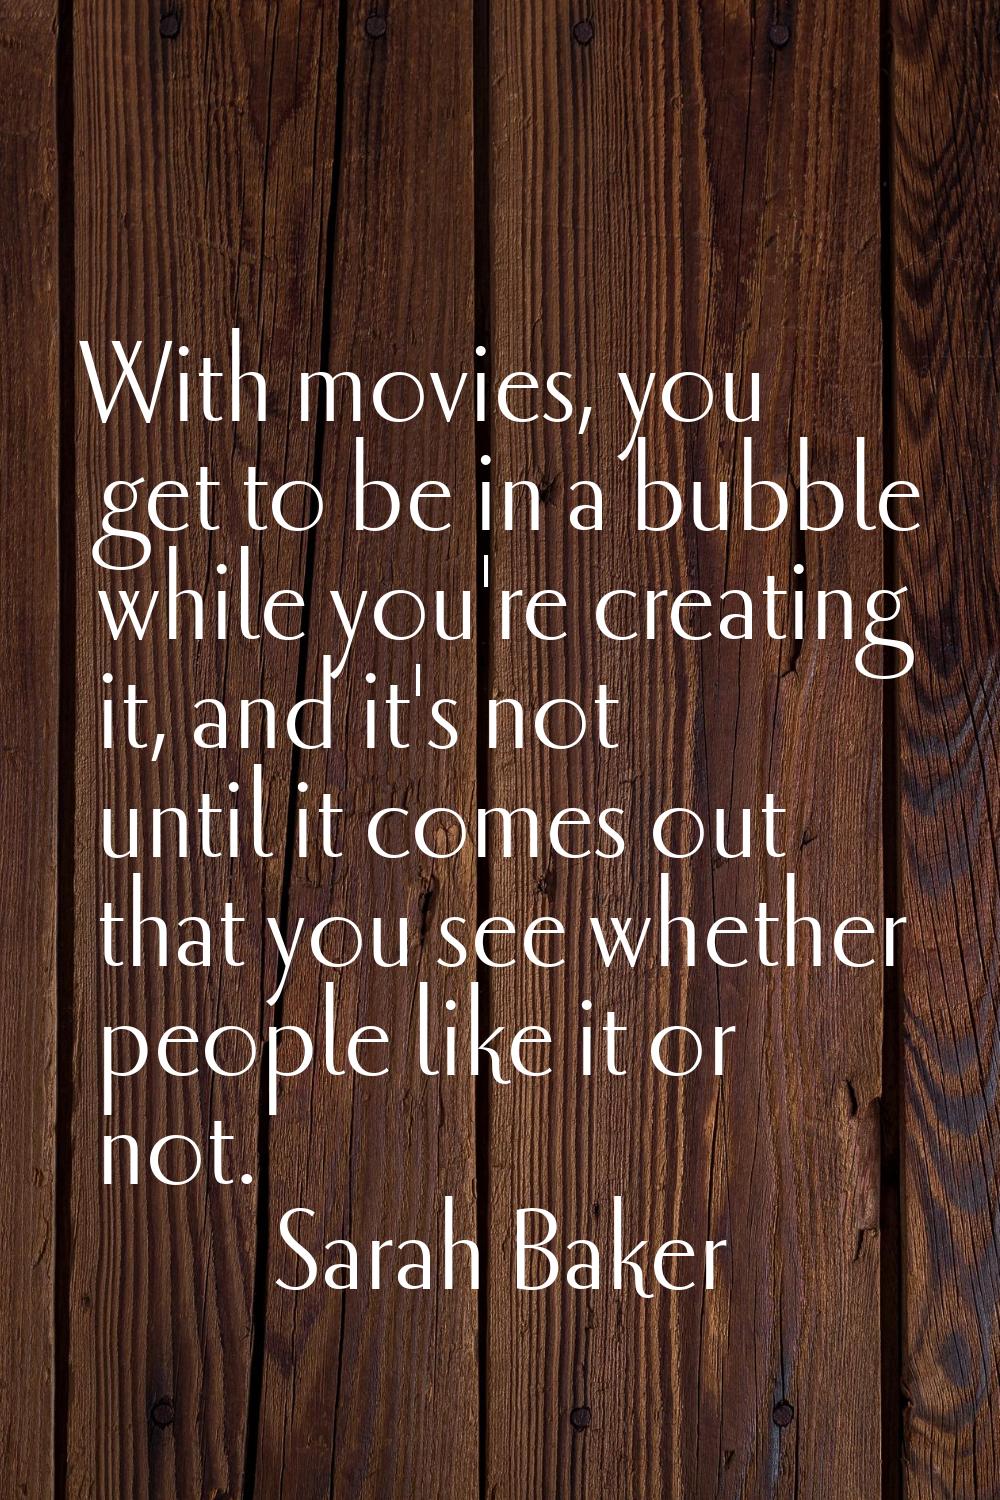 With movies, you get to be in a bubble while you're creating it, and it's not until it comes out th